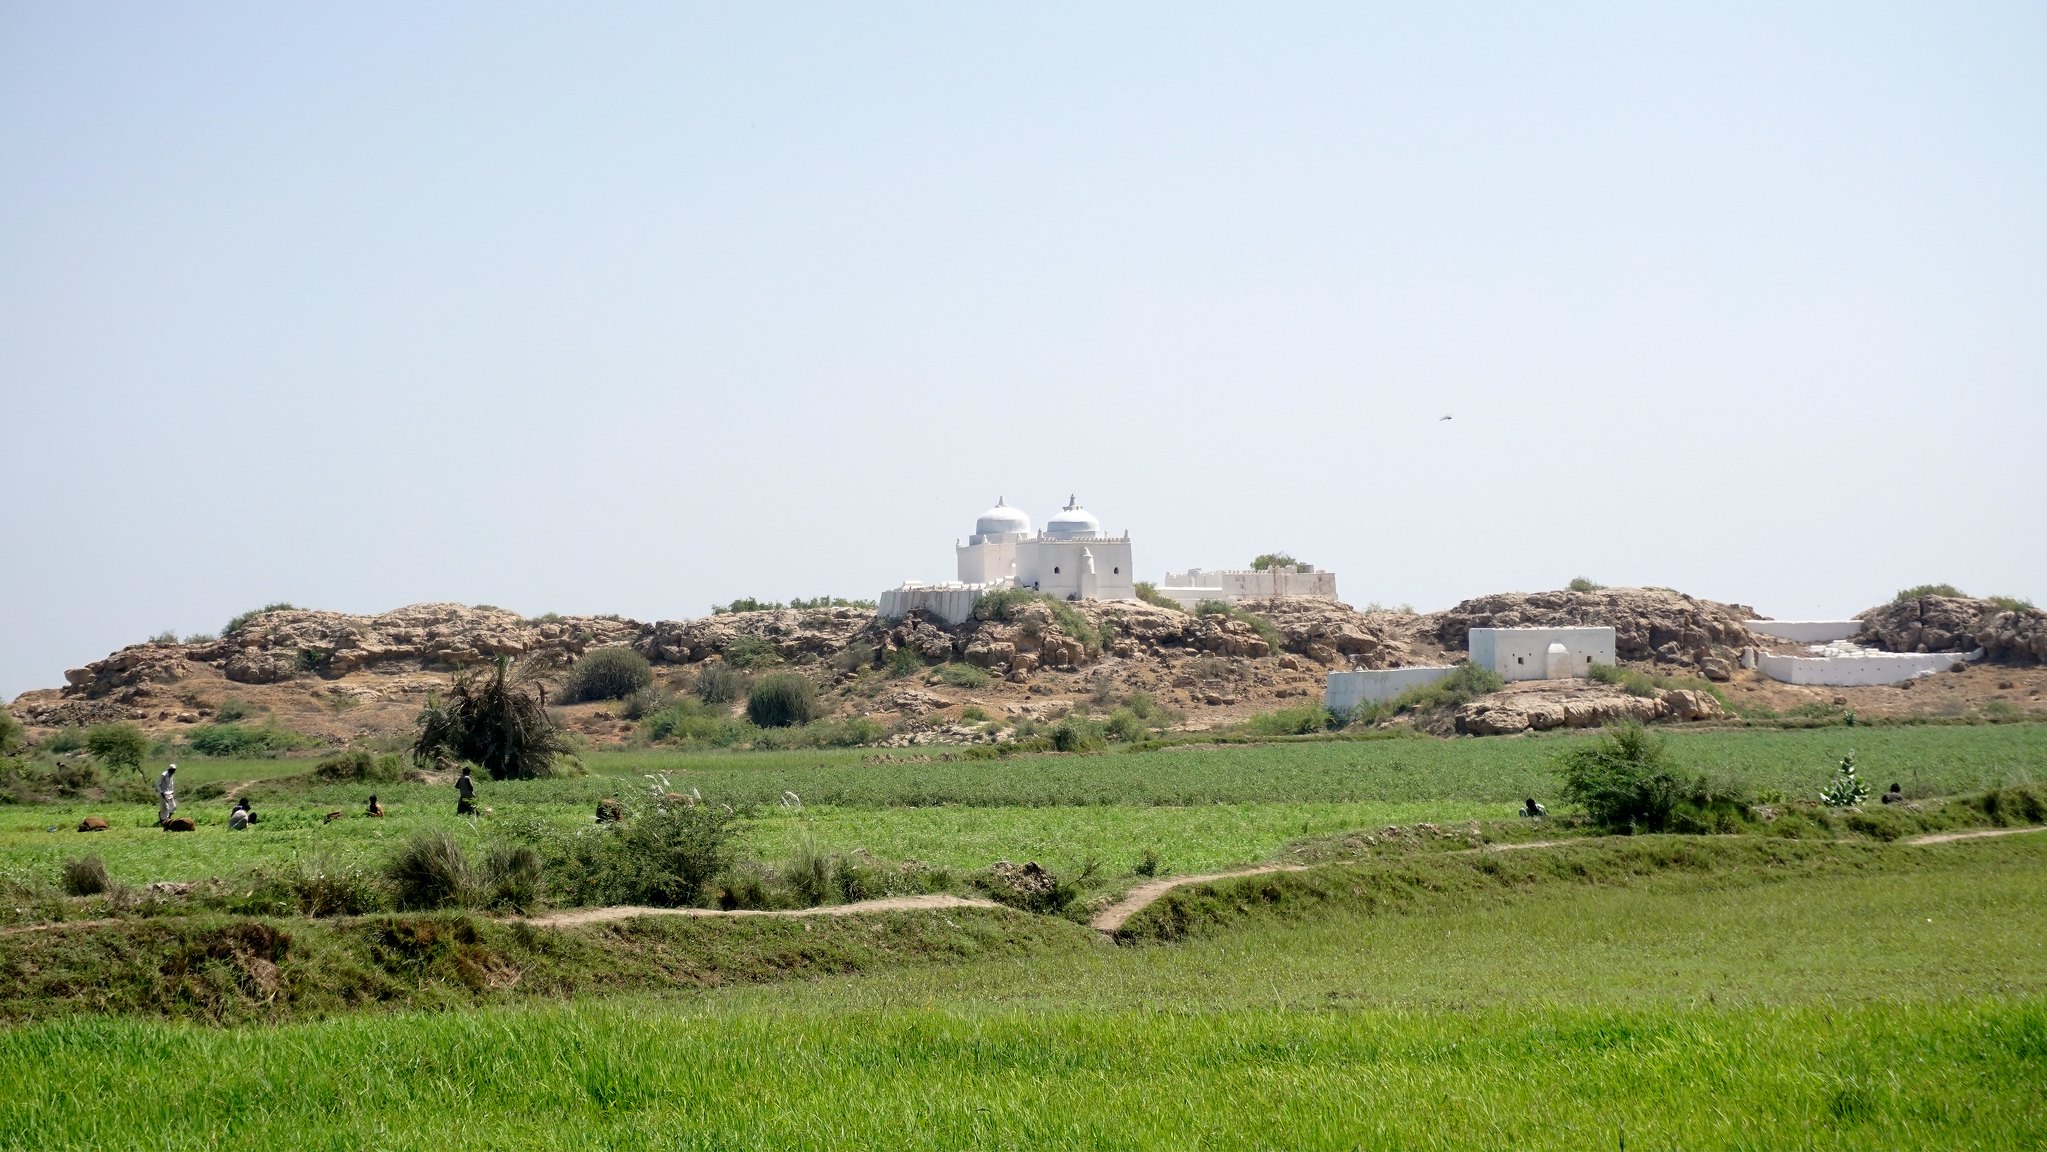 A ziarat on a cultivated mound